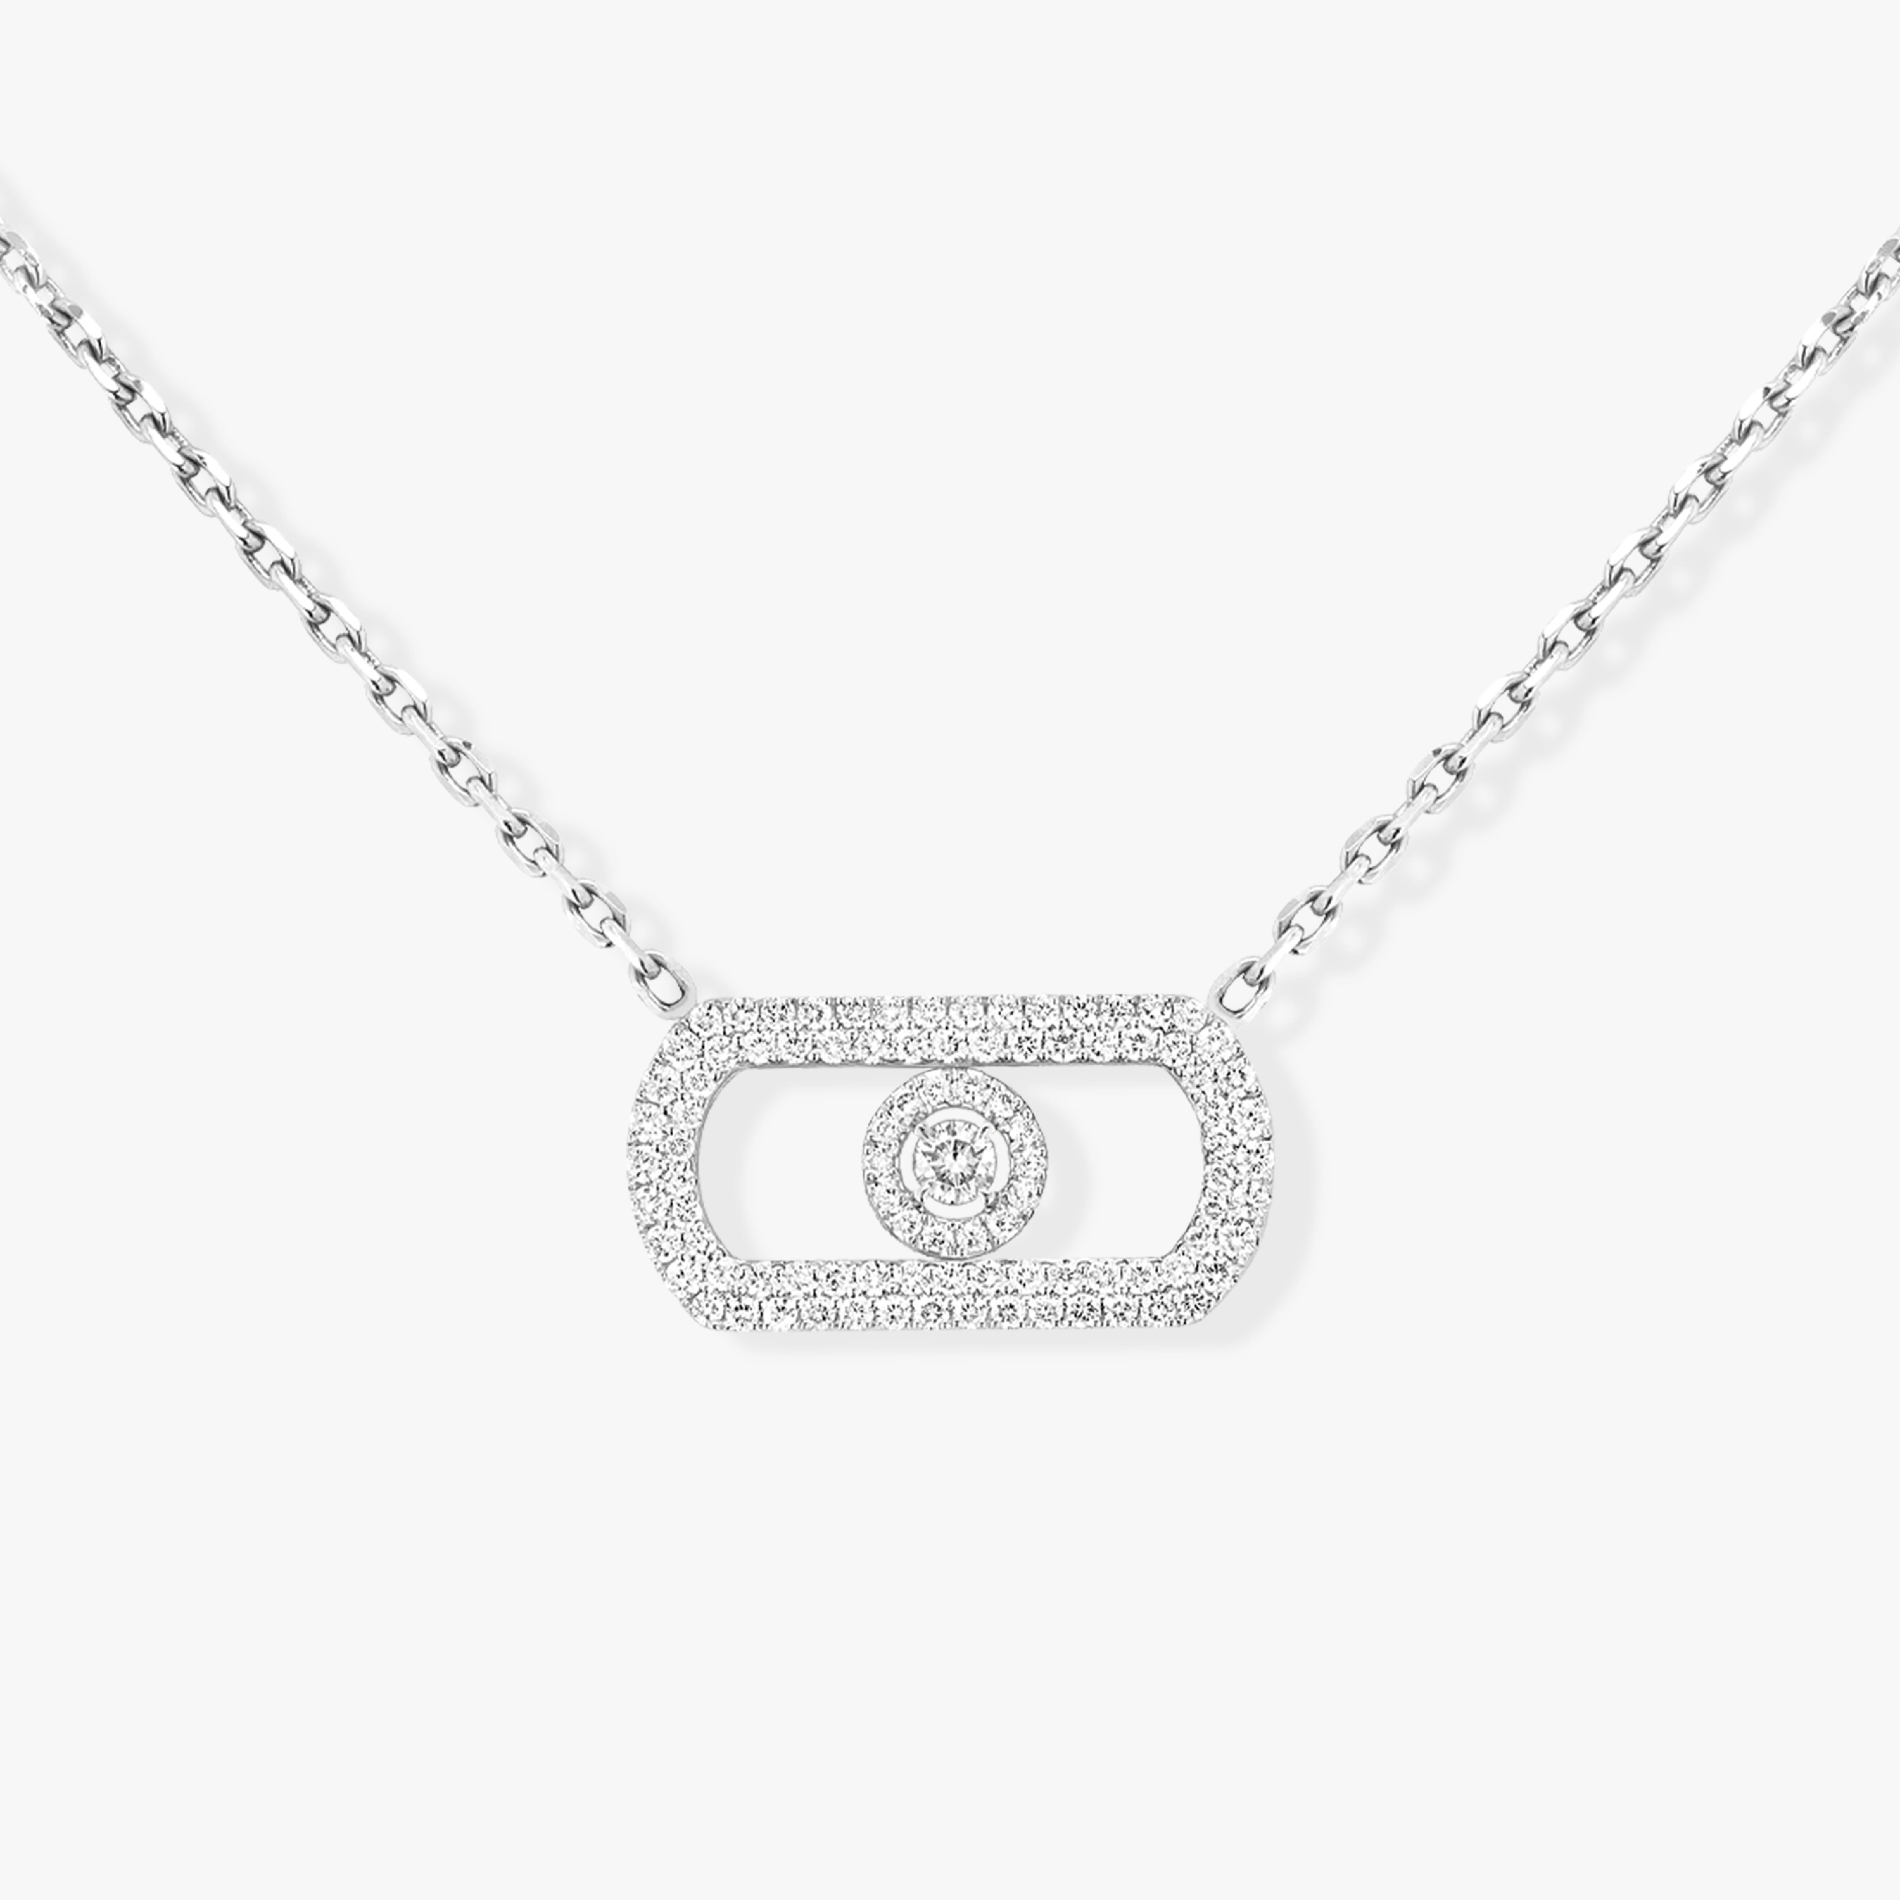 Necklace For Her White Gold Diamond So Move Pavé 12945-WG